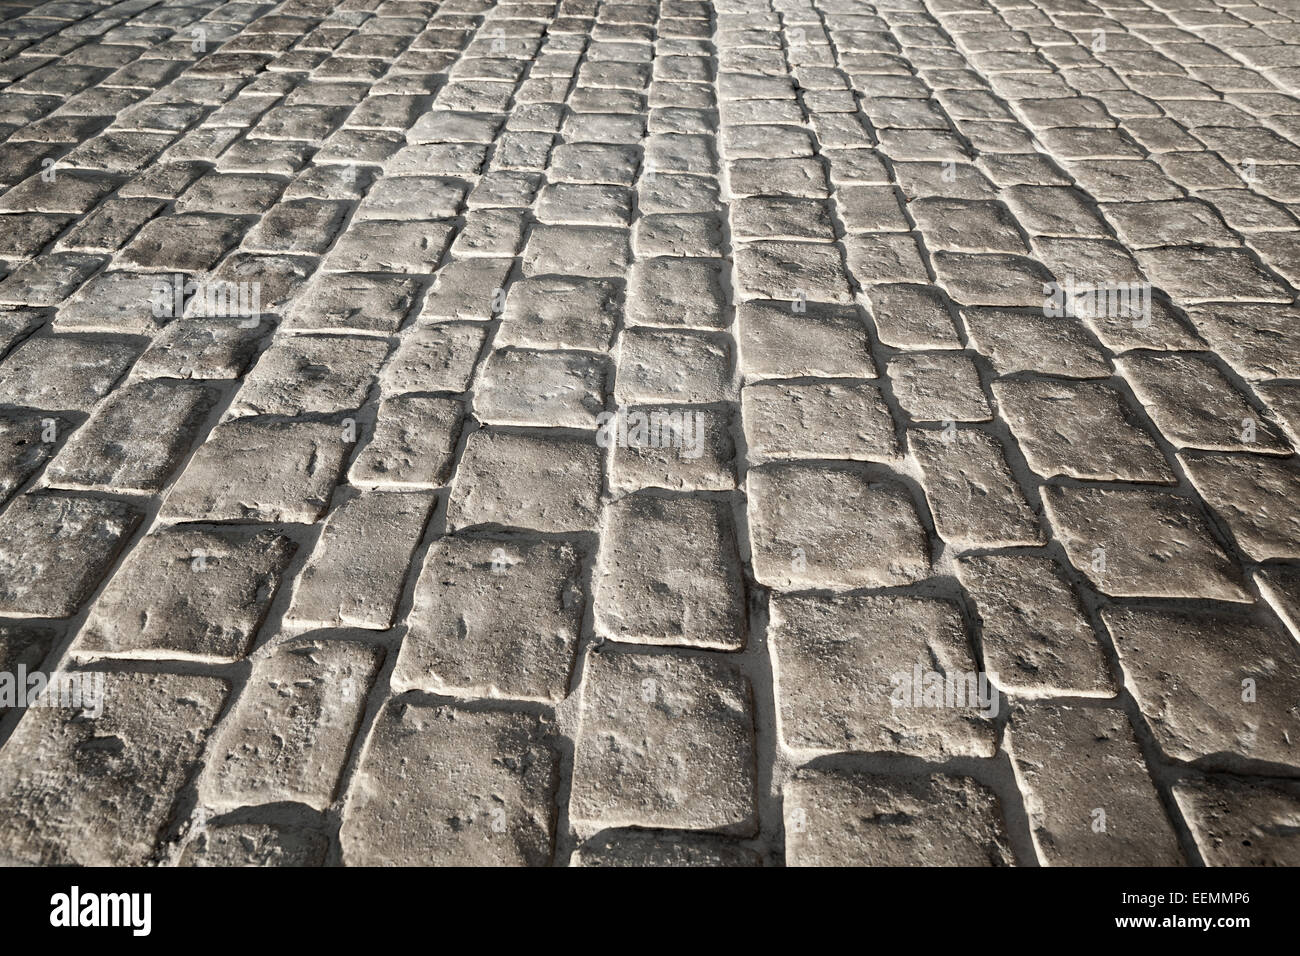 Dark gray stone floor pavement, background texture with perspective Stock Photo